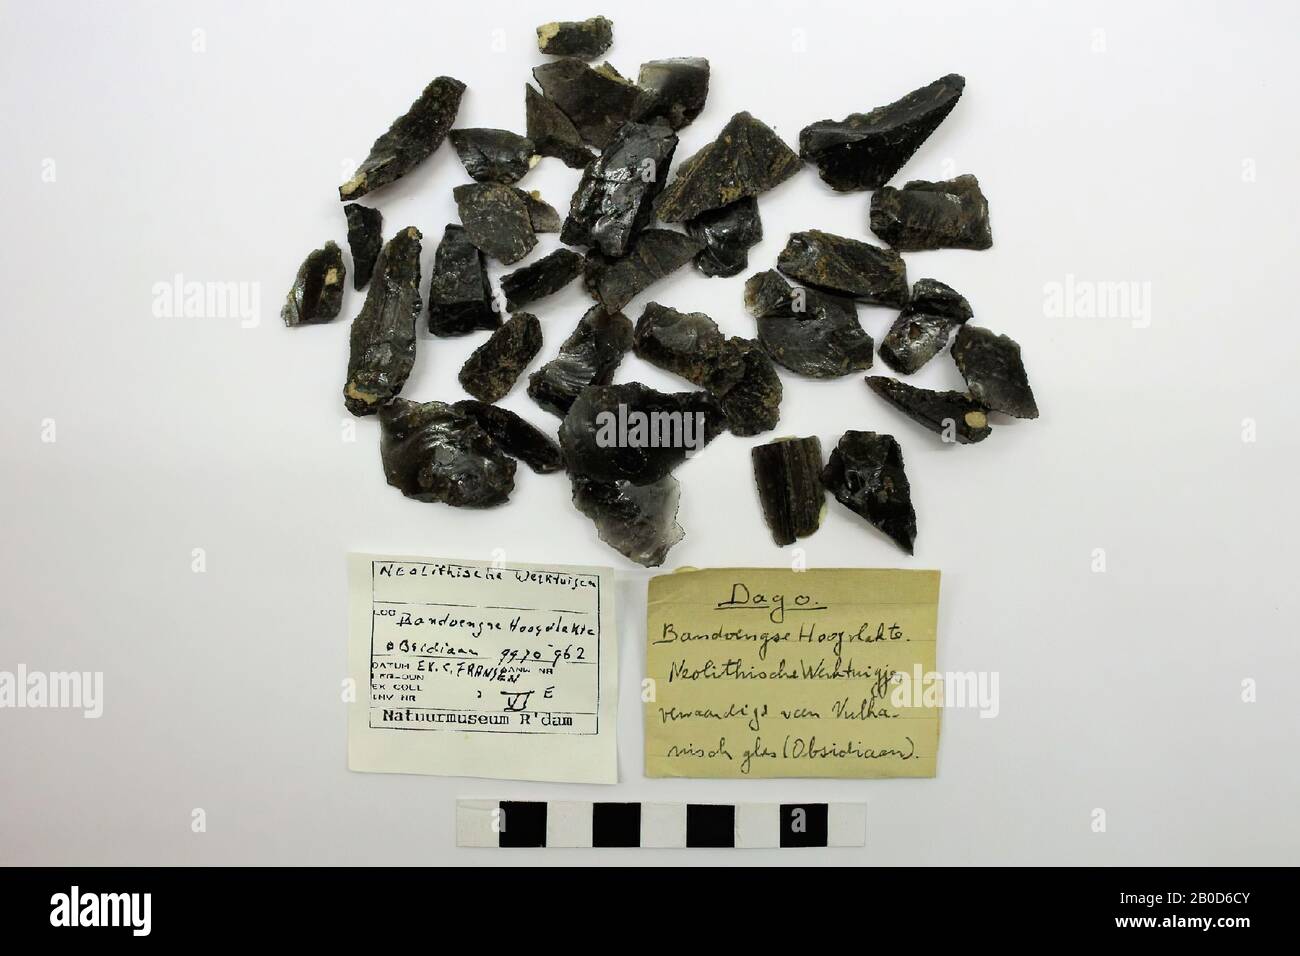 36 fragments of obsidian (volcanic glass), including exits. Ticket: Day 0. Bandoengse Plateau. Neolithic tools made of volcanic glass (Obsidian). Also map of Natural History Museum Rotterdam present, fragments, stone, obsidian, diverse, Indonesia, Sulawesi Stock Photo